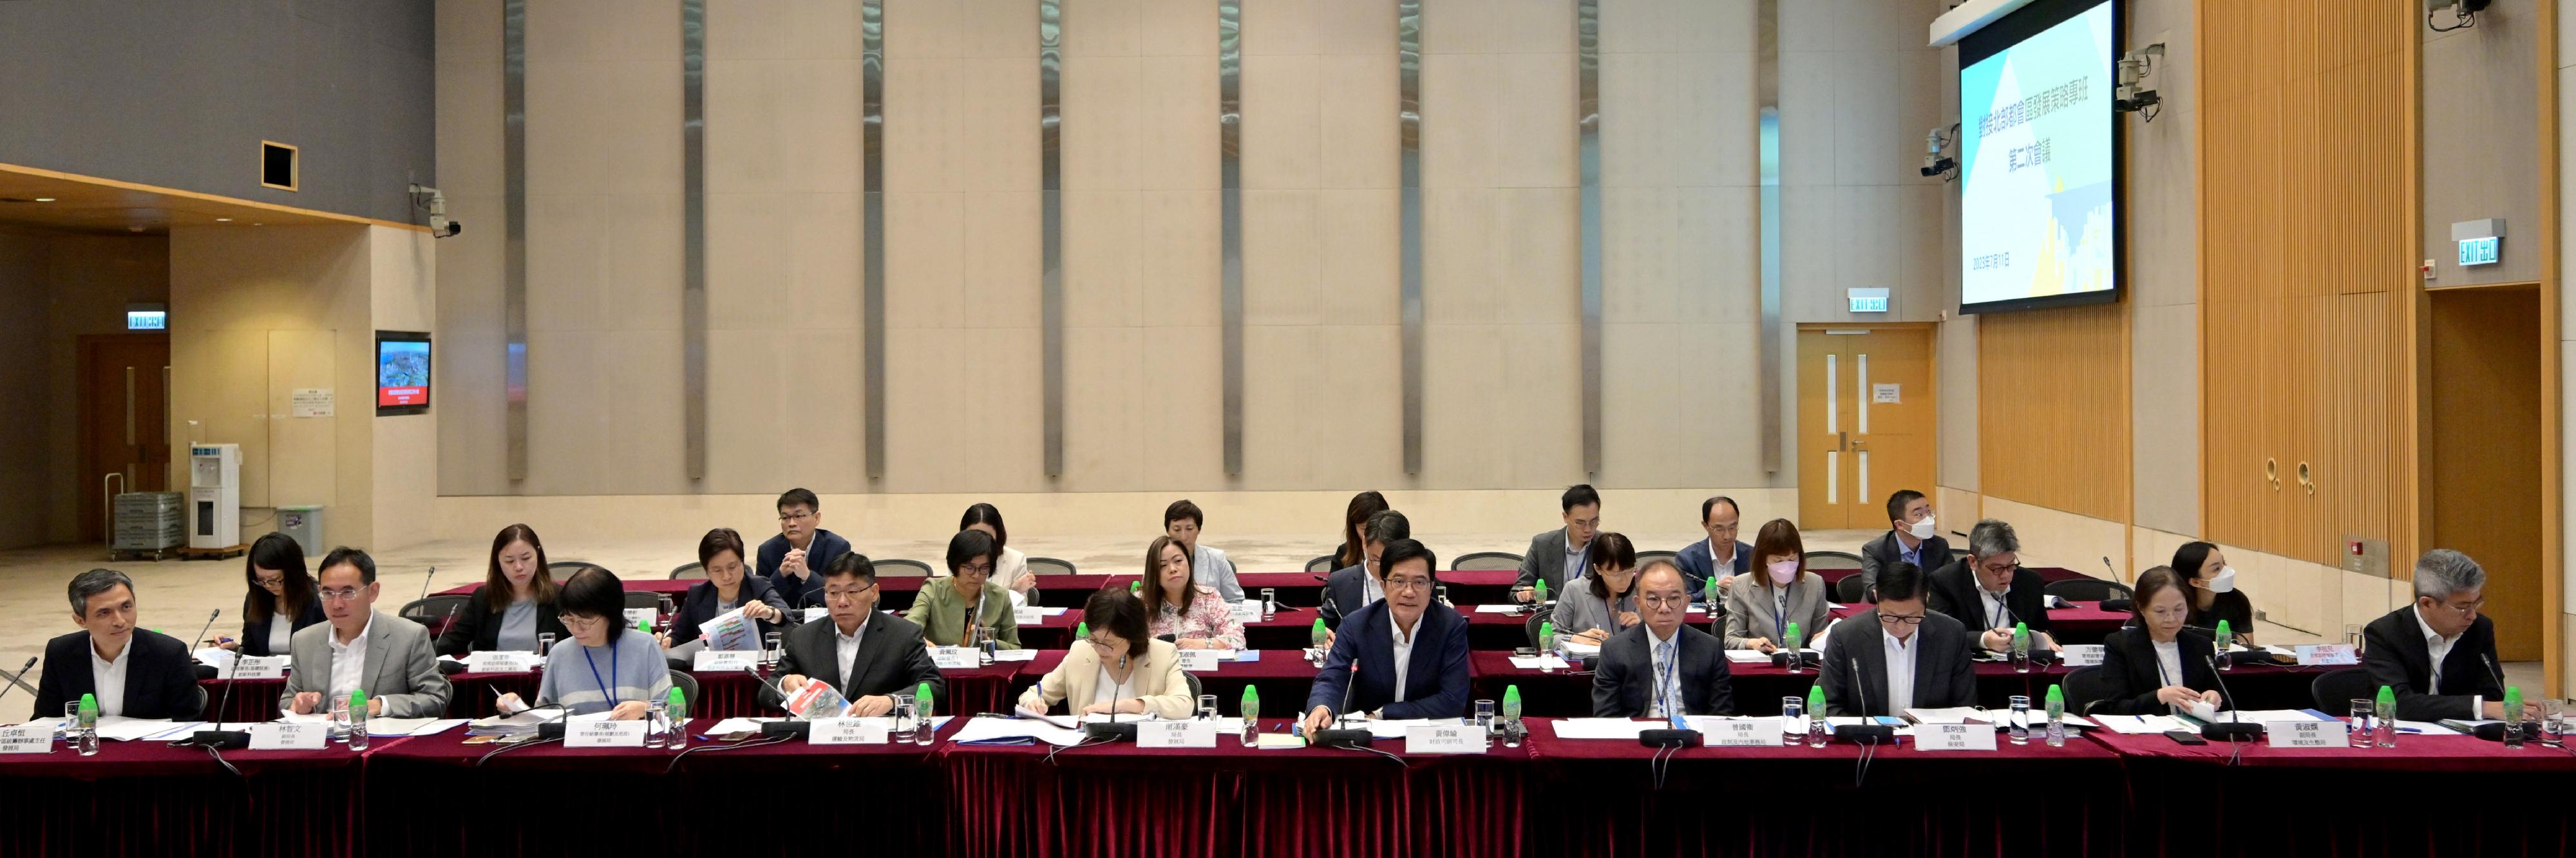 The Deputy Financial Secretary, Mr Michael Wong (first row, fifth right), and Vice Mayor of Shenzhen Municipal People's Government Mr Huang Min, leading delegations of the governments of the Hong Kong Special Administrative Region and Shenzhen respectively, held the second meeting of the Task Force for Collaboration on the Northern Metropolis Development Strategy in Hong Kong today (July 11). Also attending are the Secretary for Development, Ms Bernadette Linn (first row, fifth left); the Secretary for Constitutional and Mainland Affairs, Mr Erick Tsang Kwok-wai (first row, fourth right); the Secretary for Transport and Logistics, Mr Lam Sai-hung (first row, fourth left); the Secretary for Security, Mr Tang Ping-keung (first row, third right); the Under Secretary for Environment and Ecology, Miss Diane Wong (first row, second right); the Under Secretary for Culture, Sports and Tourism, Mr Raistlin Lau (first row, first right); the Permanent Secretary for Development (Planning & Lands), Ms Doris Ho (first row, third left); the Under Secretary for Development, Mr David Lam (first row, second left); and the Director of Northern Metropolis Co-ordination Office, Mr Vic Yau (first row, first left).